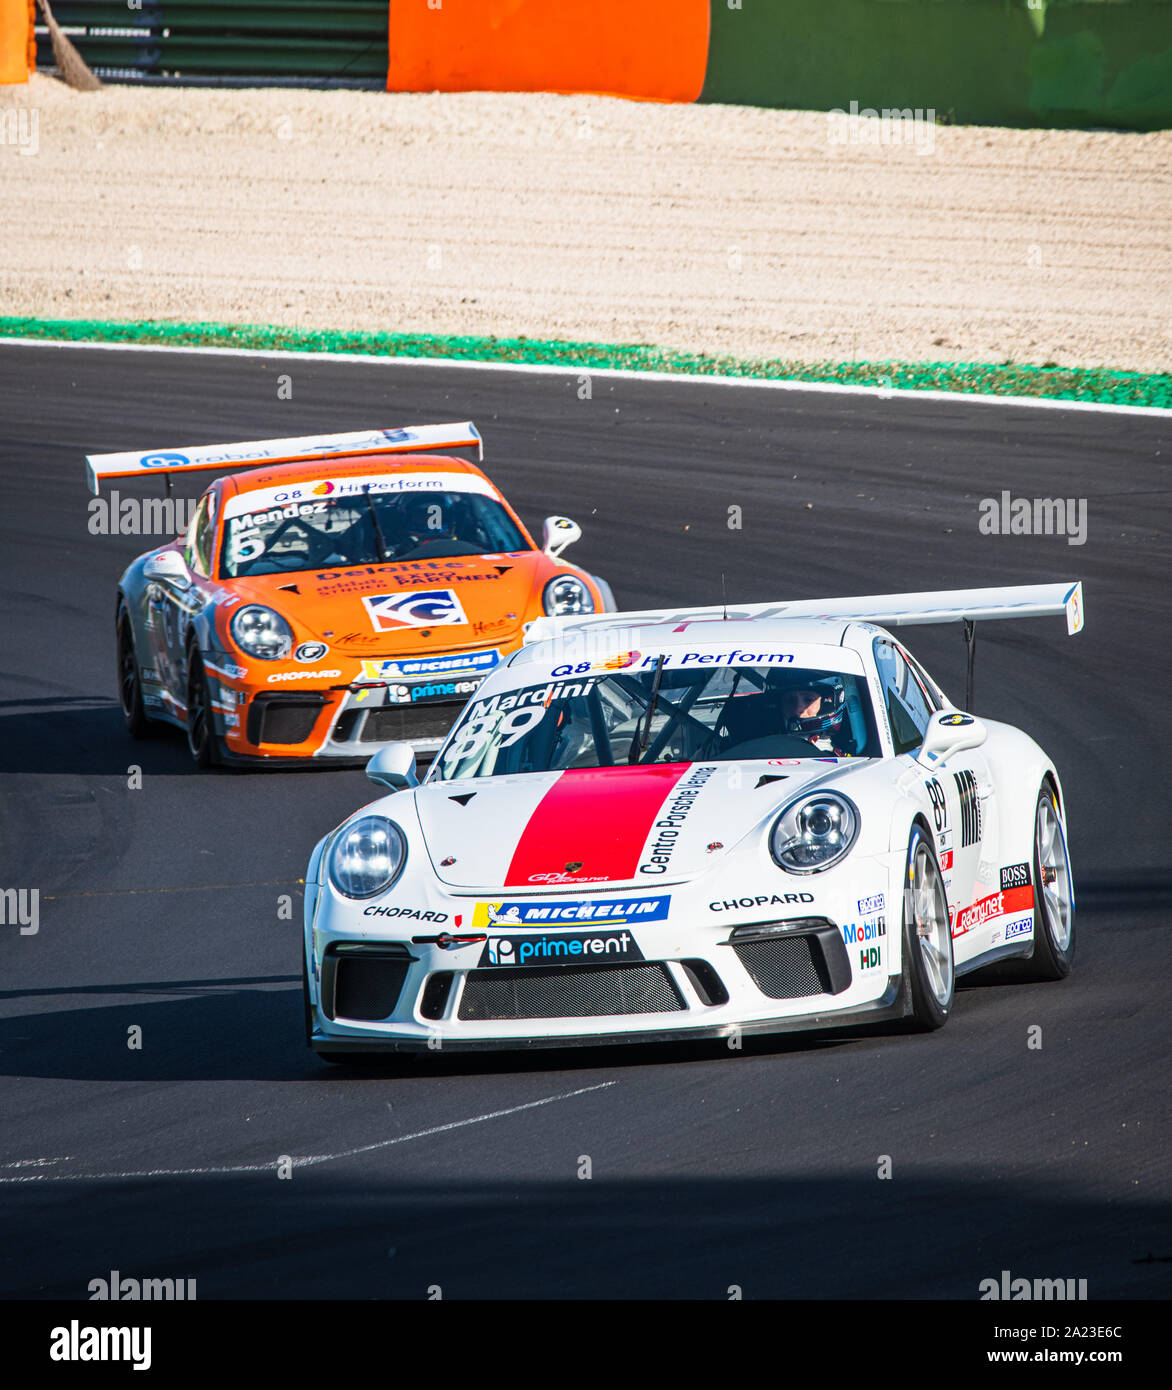 Vallelunga, Italy september 14 2019.  Front view of Porsche Carrera racing car during race in action at turn Stock Photo